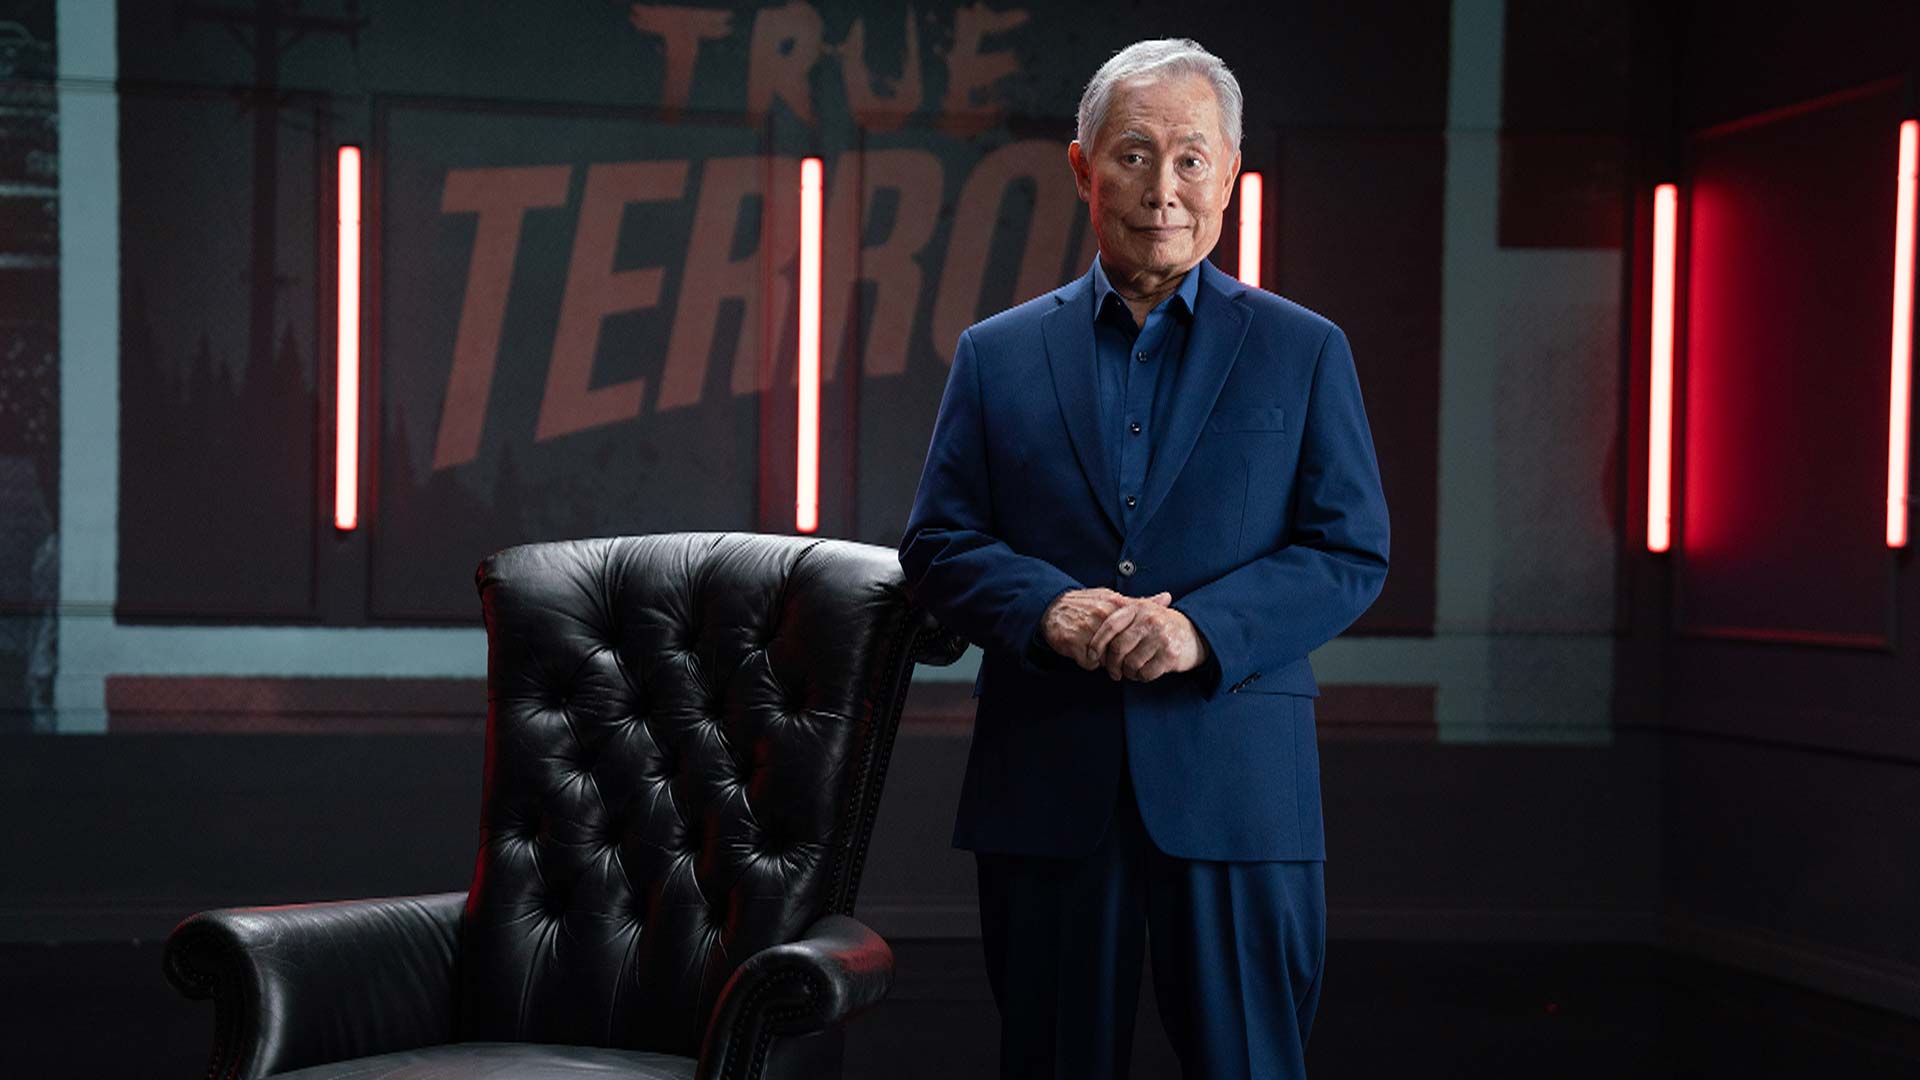 True Terror with George Takei Season 2 Episode 5 - The Kinross Incident